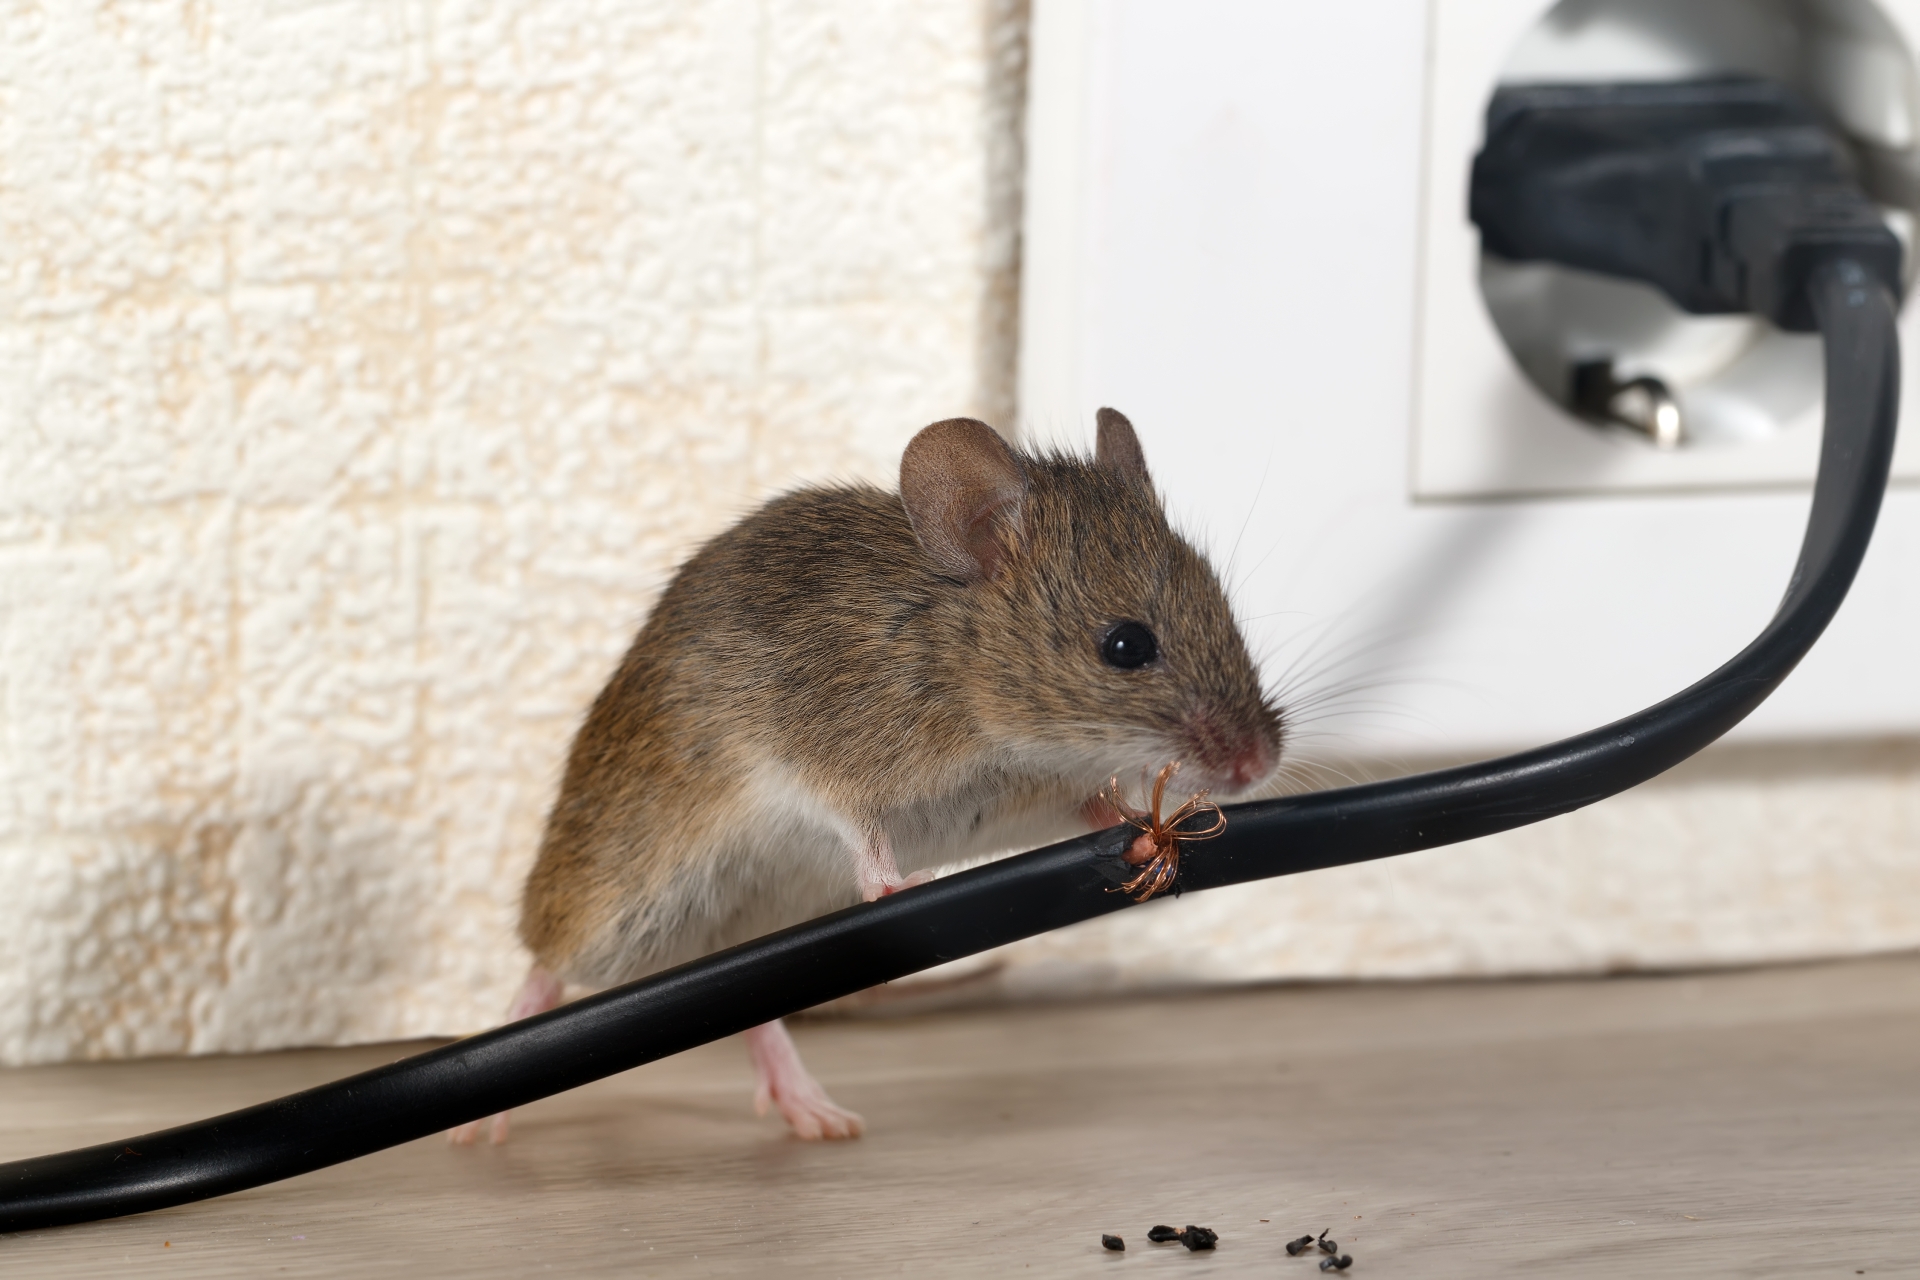 Mice Infestation, Pest Control in New Malden, KT3. Call Now 020 8166 9746